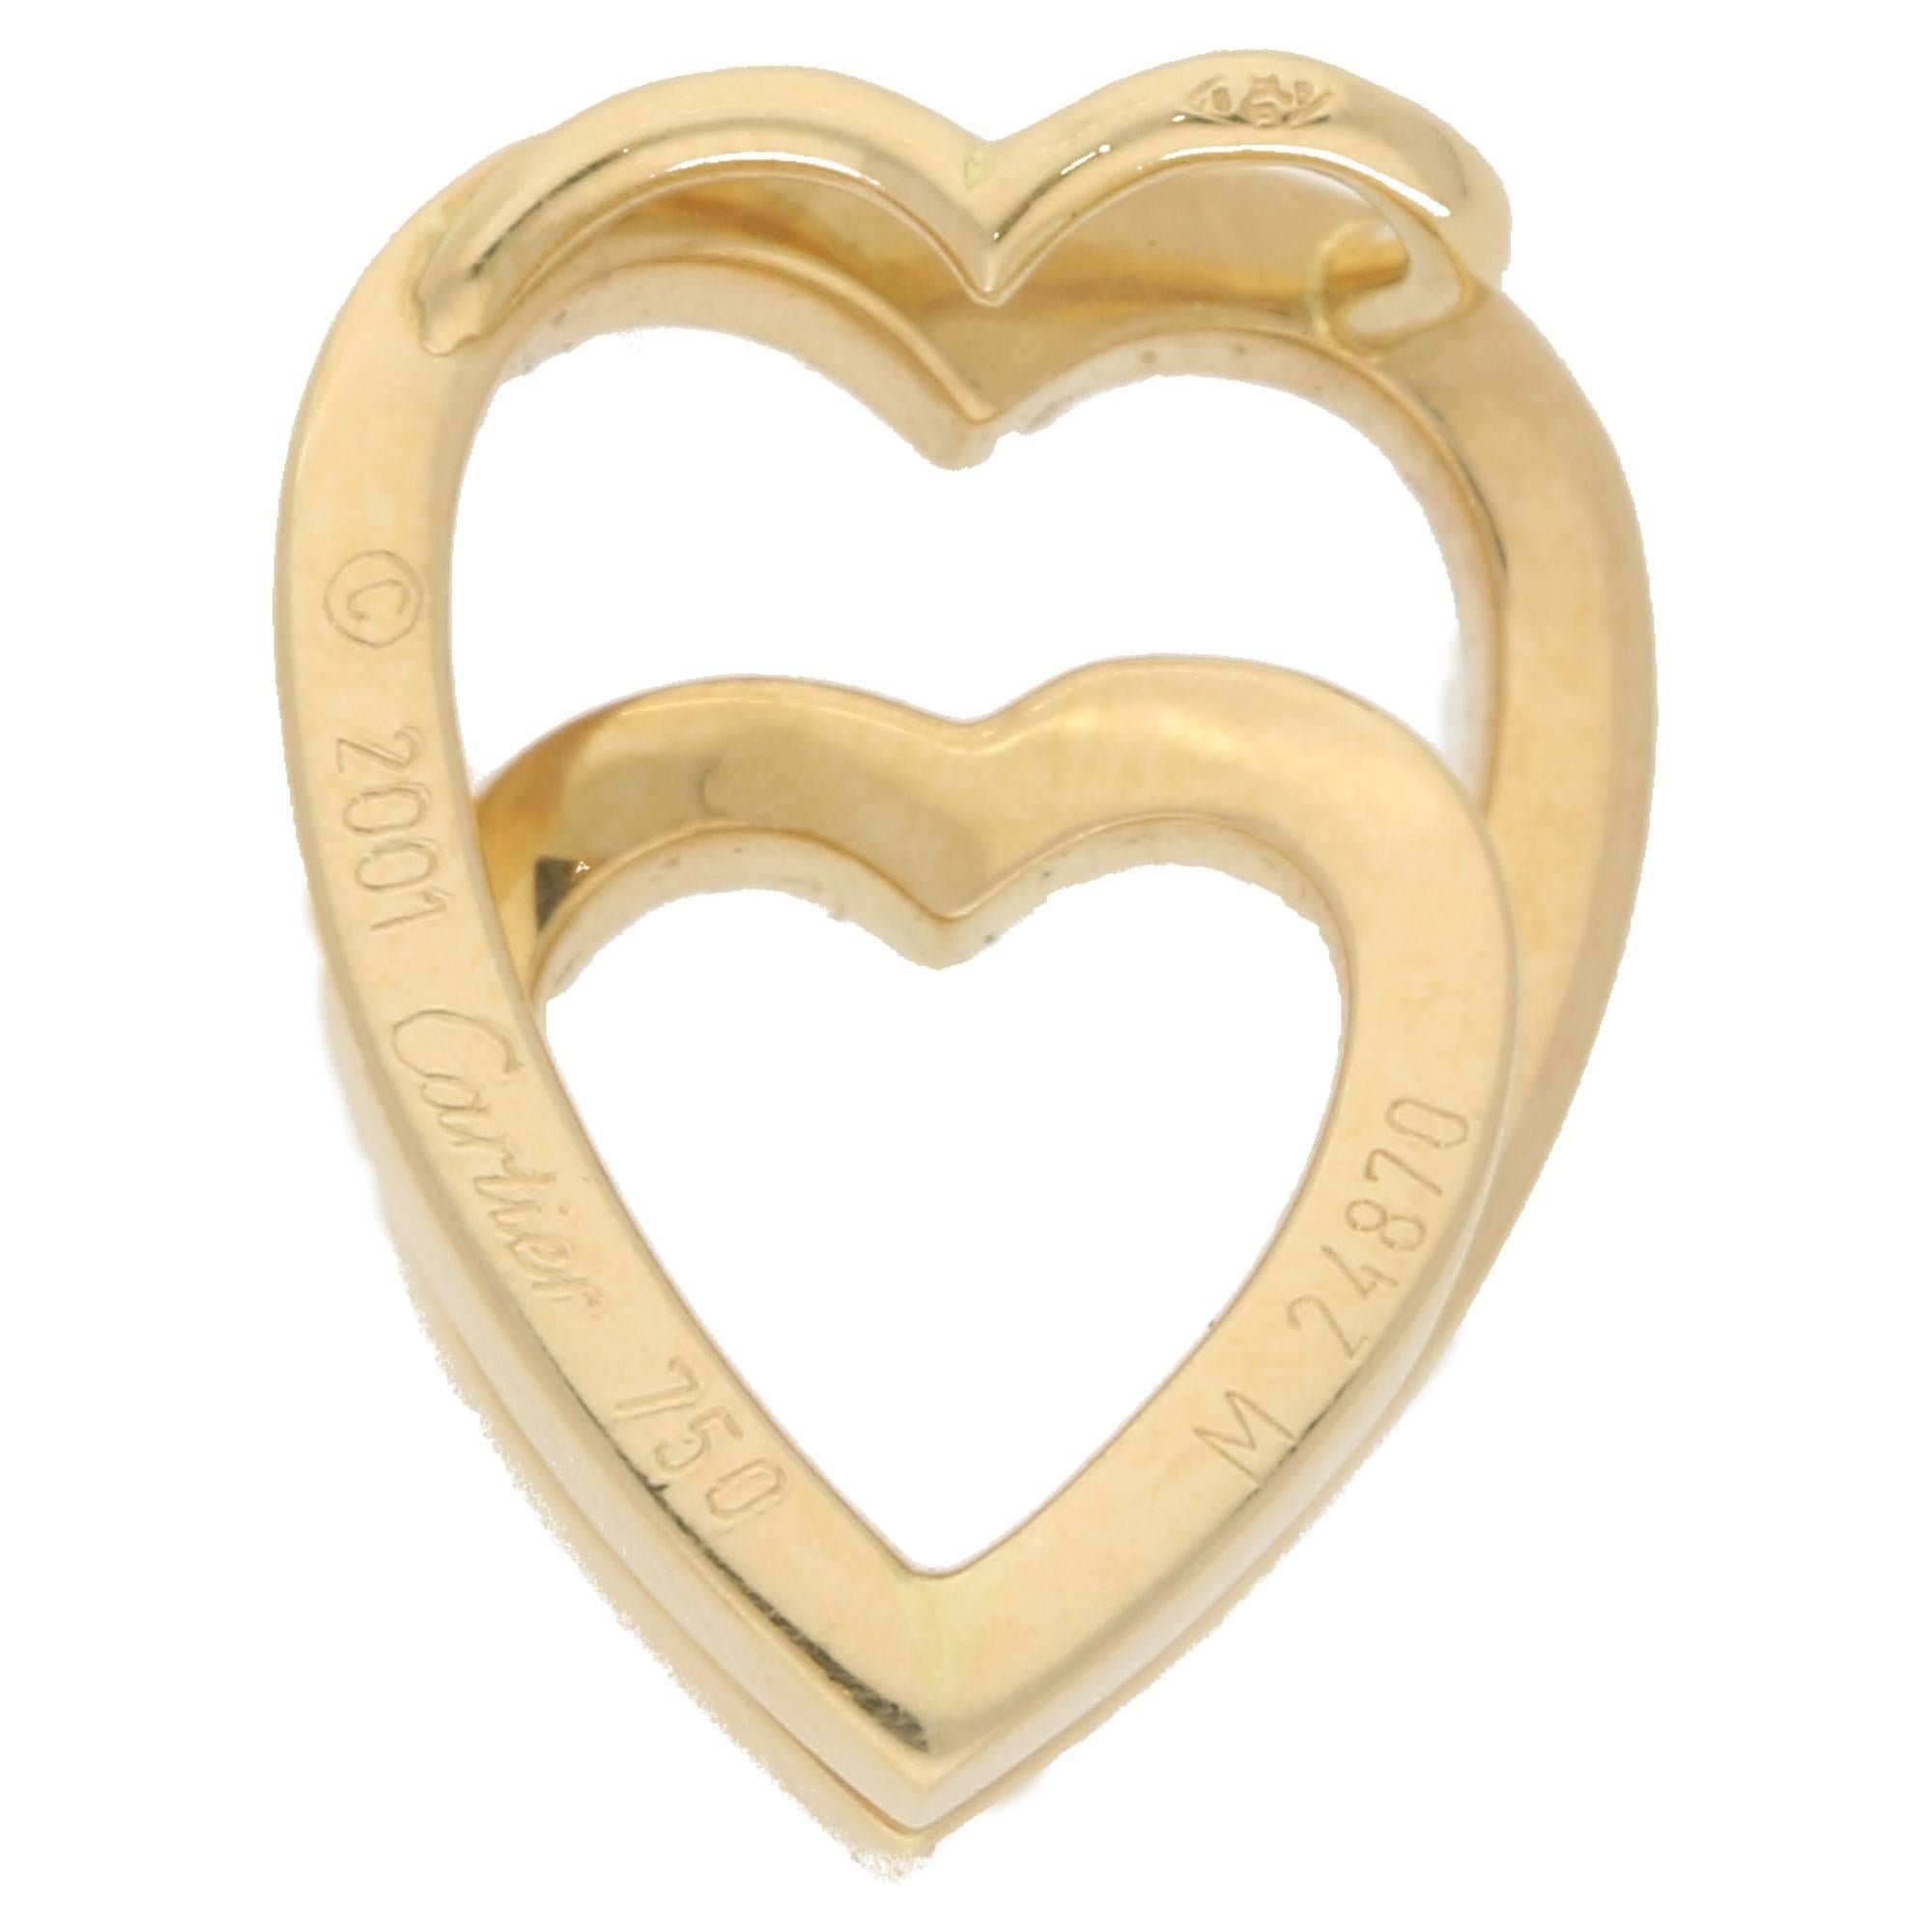  A Cartier 'Double Love' pendant featuring a heart cradling a second heart in 18ct yellow gold. The pendant measures 18x15mm.